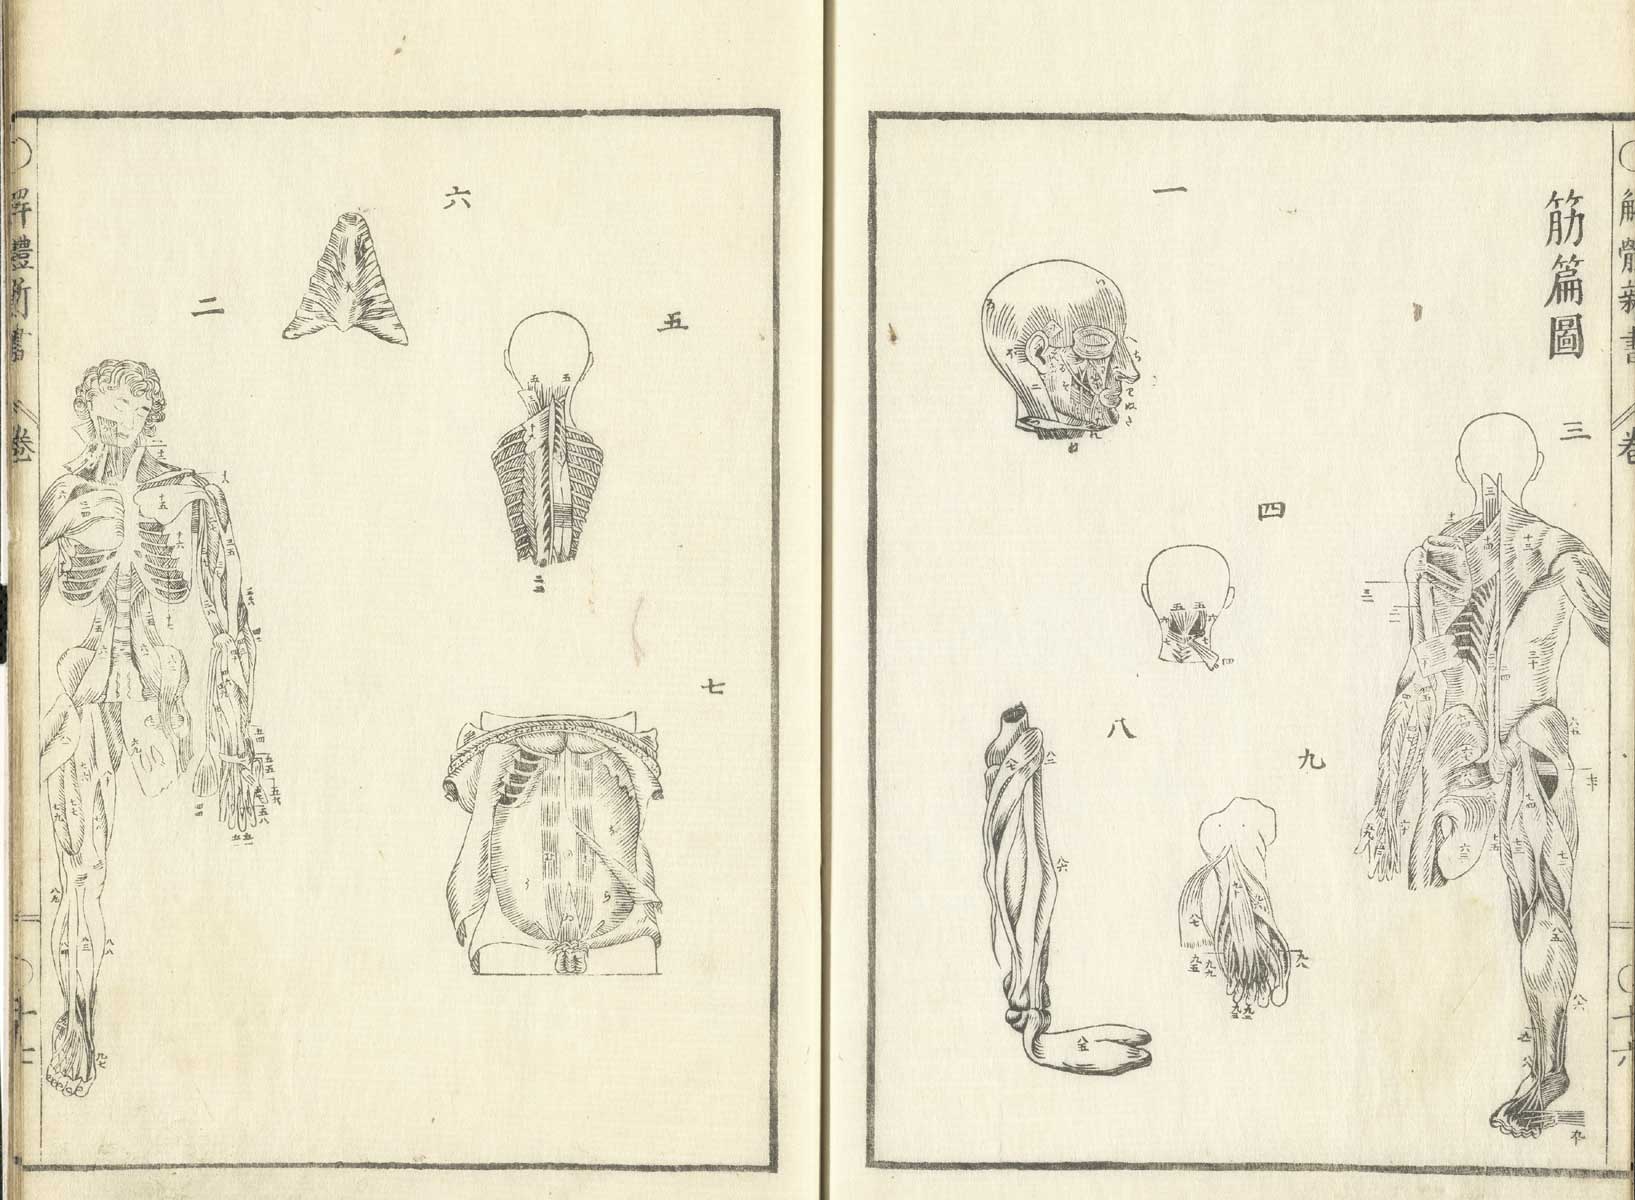 Pages 16 and 17 of Johann Adam Kulmus' Kaitai shinsho. Page 16 are five illustrations of the muscles of the back of a flayed corpse. Page 17 are four illustrations of the front muscles of a flayed corpse.